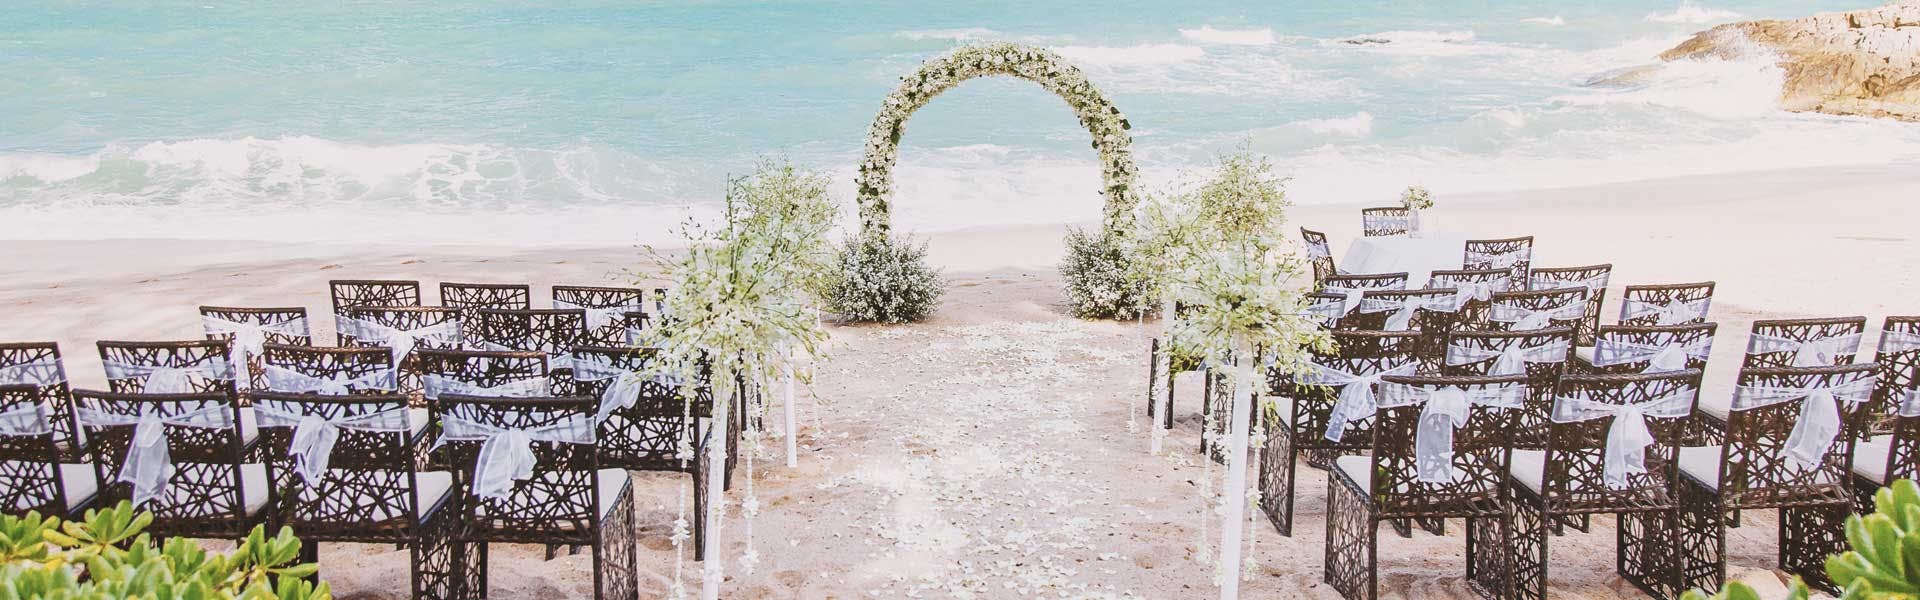 Complete your dream wedding in the Maldives with a private group charter flight!